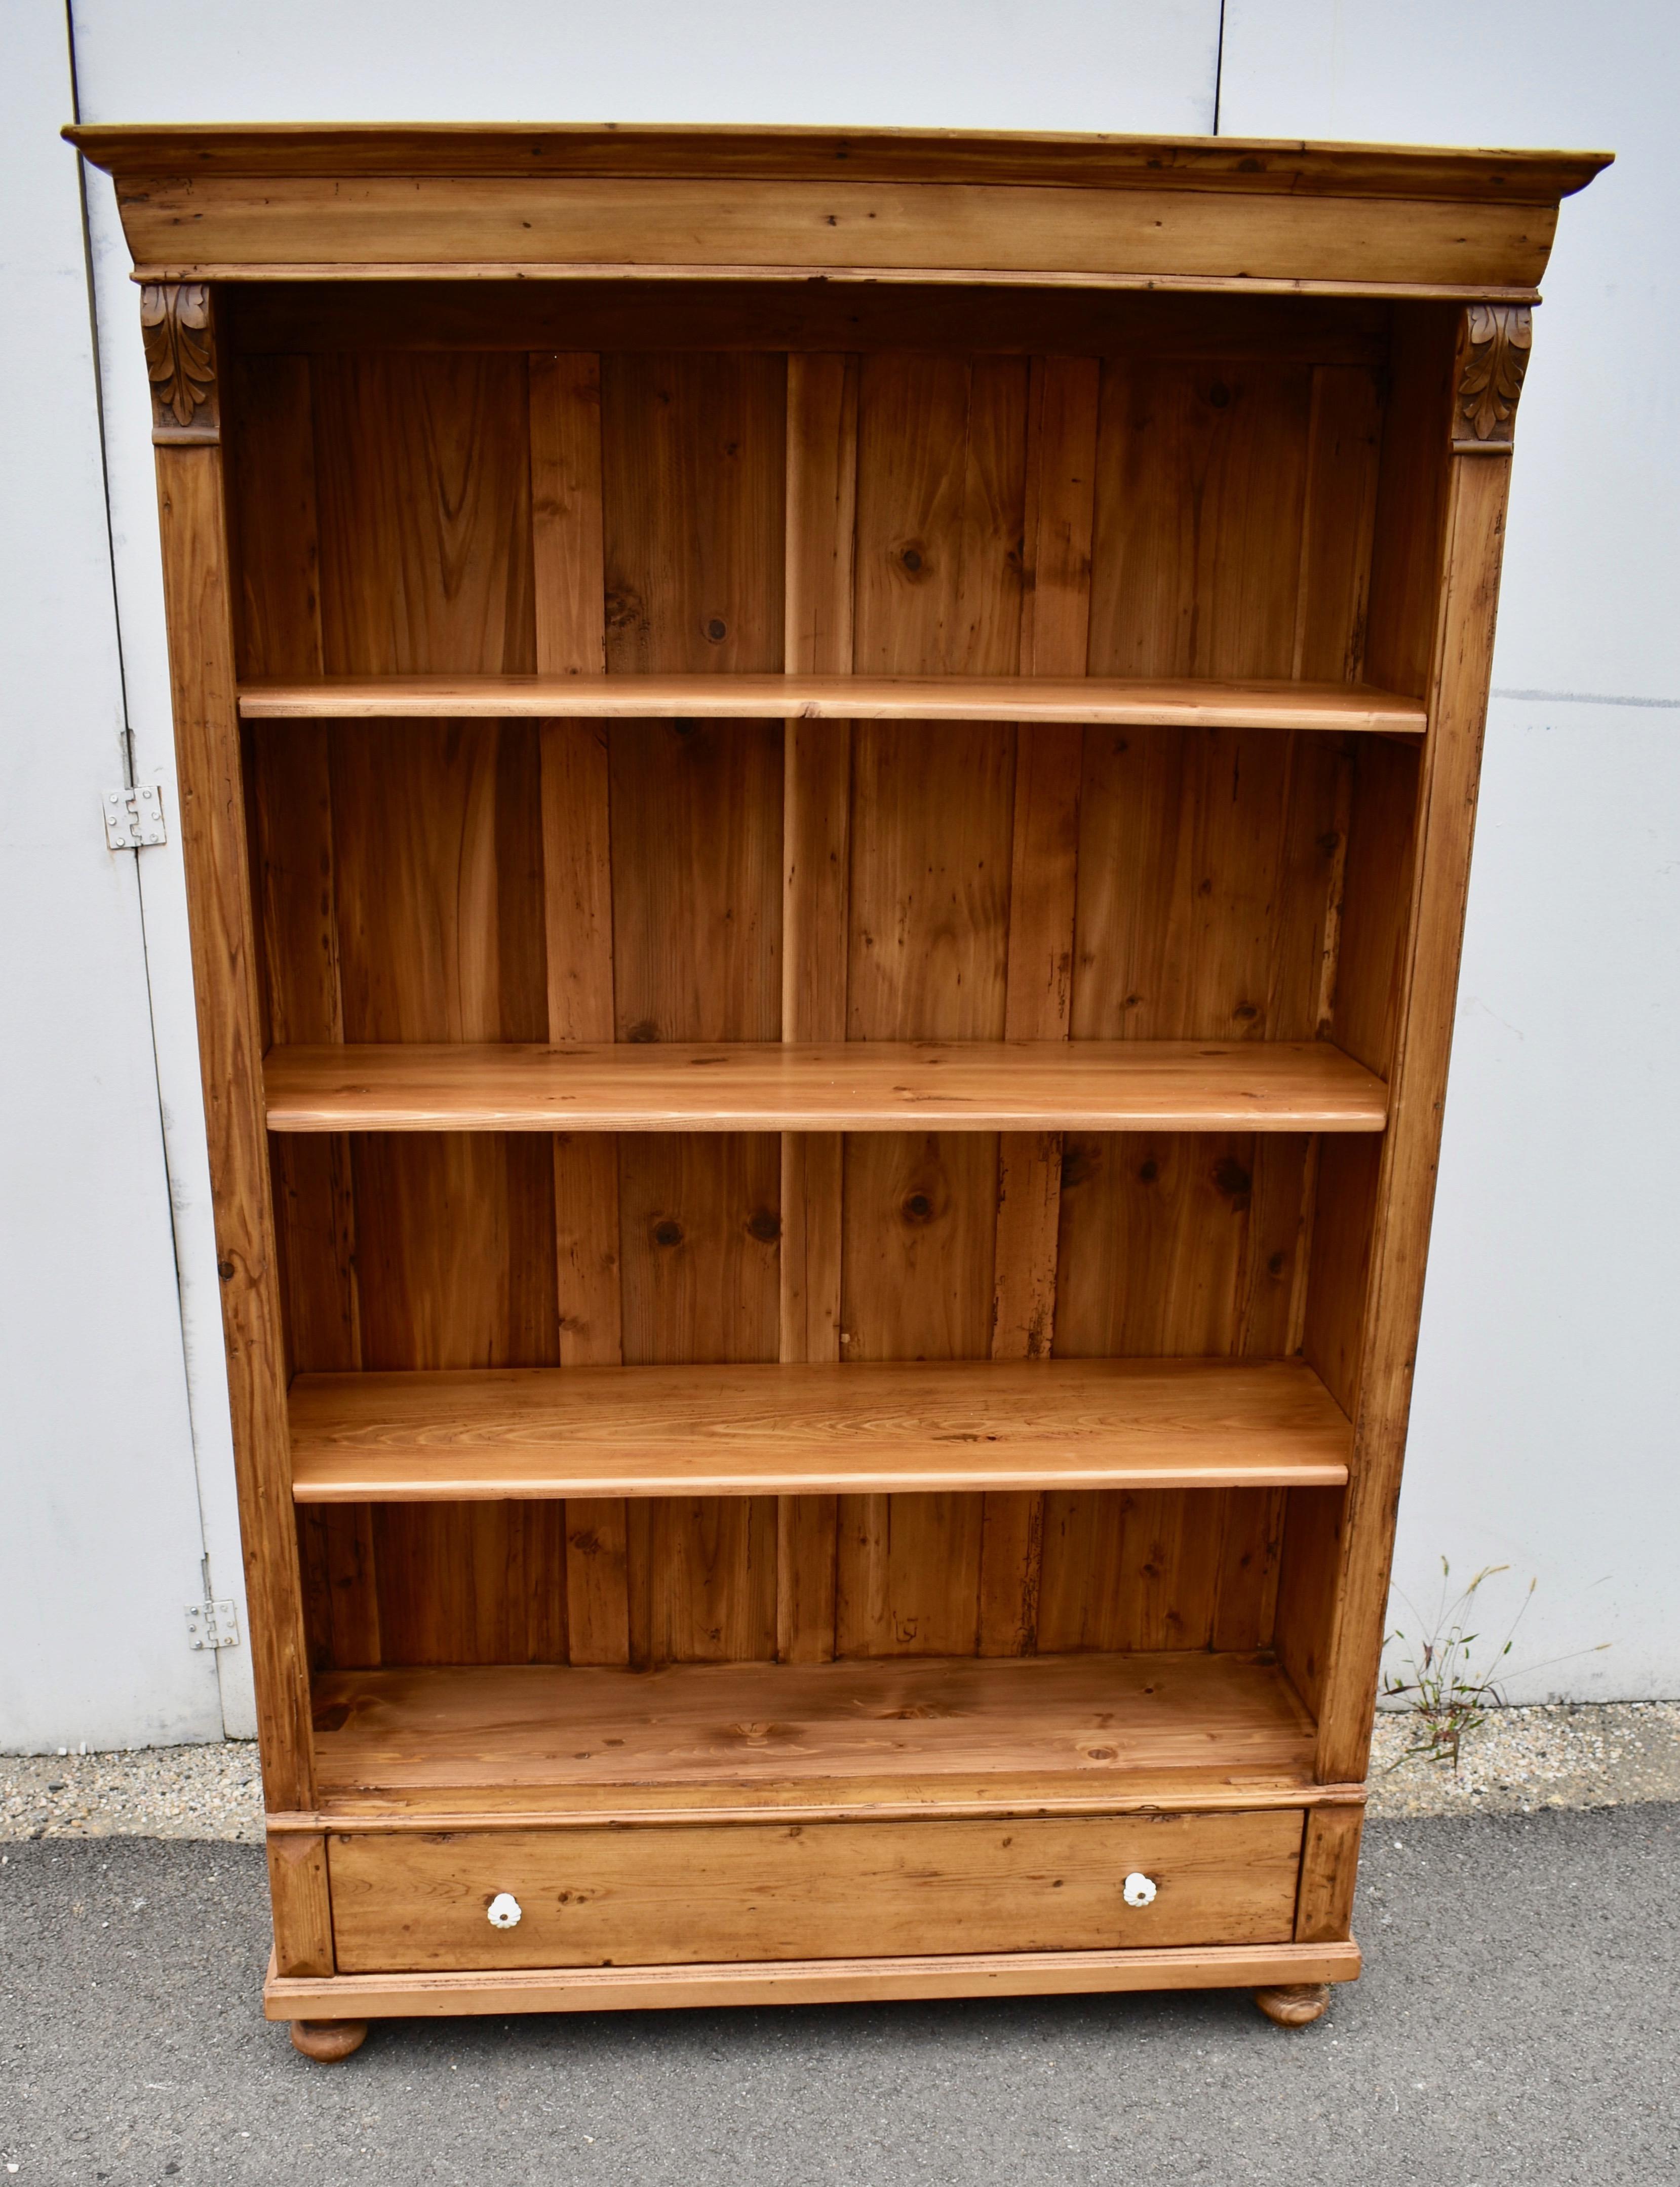 Antique pine bookcases are hard to find so the shell of this piece was provided by a vintage pine armoire.  With one board width removed from the sides and the original backboards and crown molding retained, with the drawer reduced in depth, we get